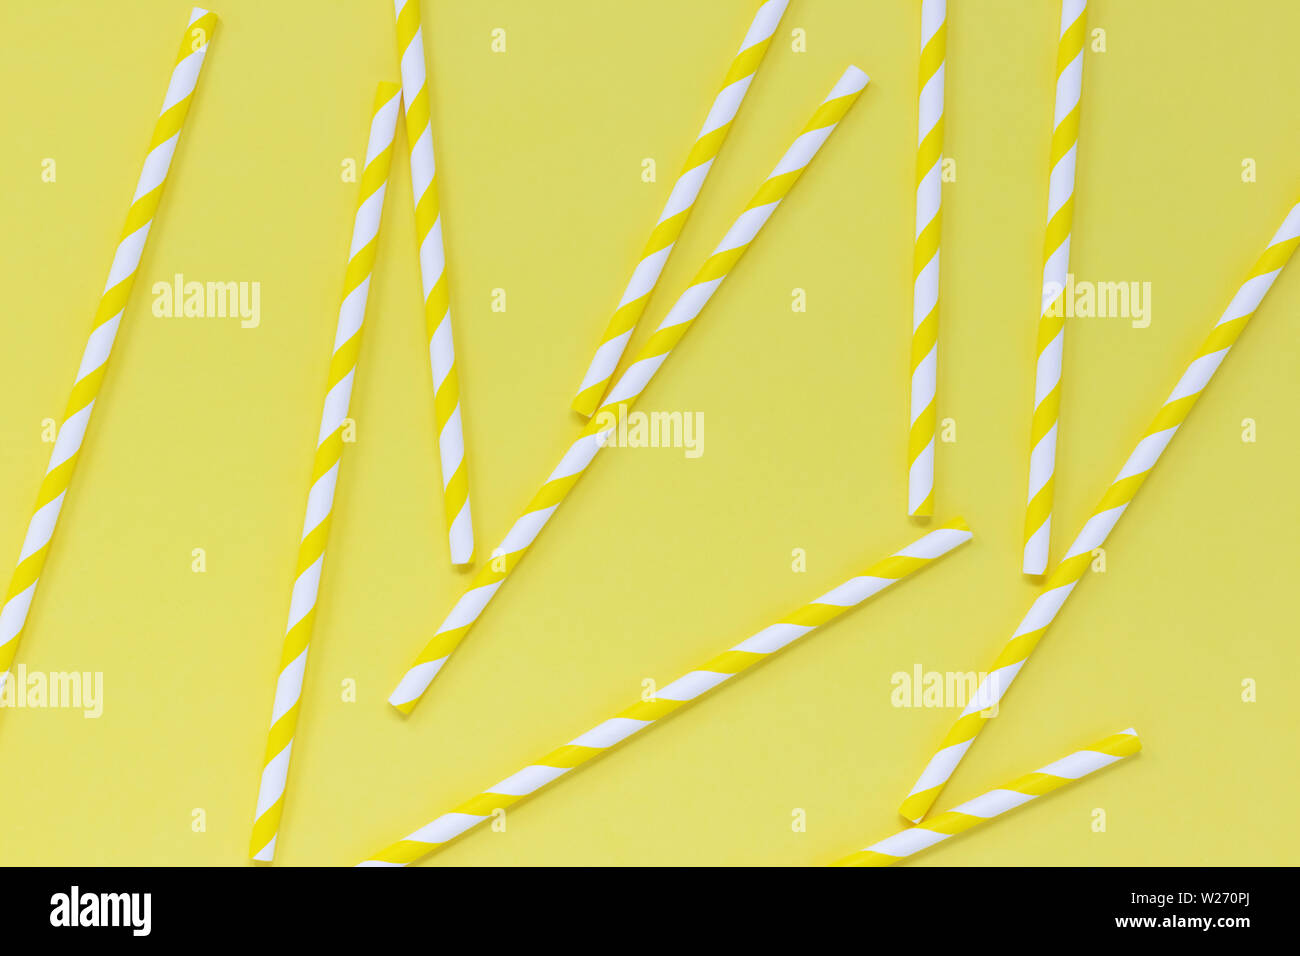 Striped paper straws scattered on a yellow background. Bright summery flat lay. Stock Photo